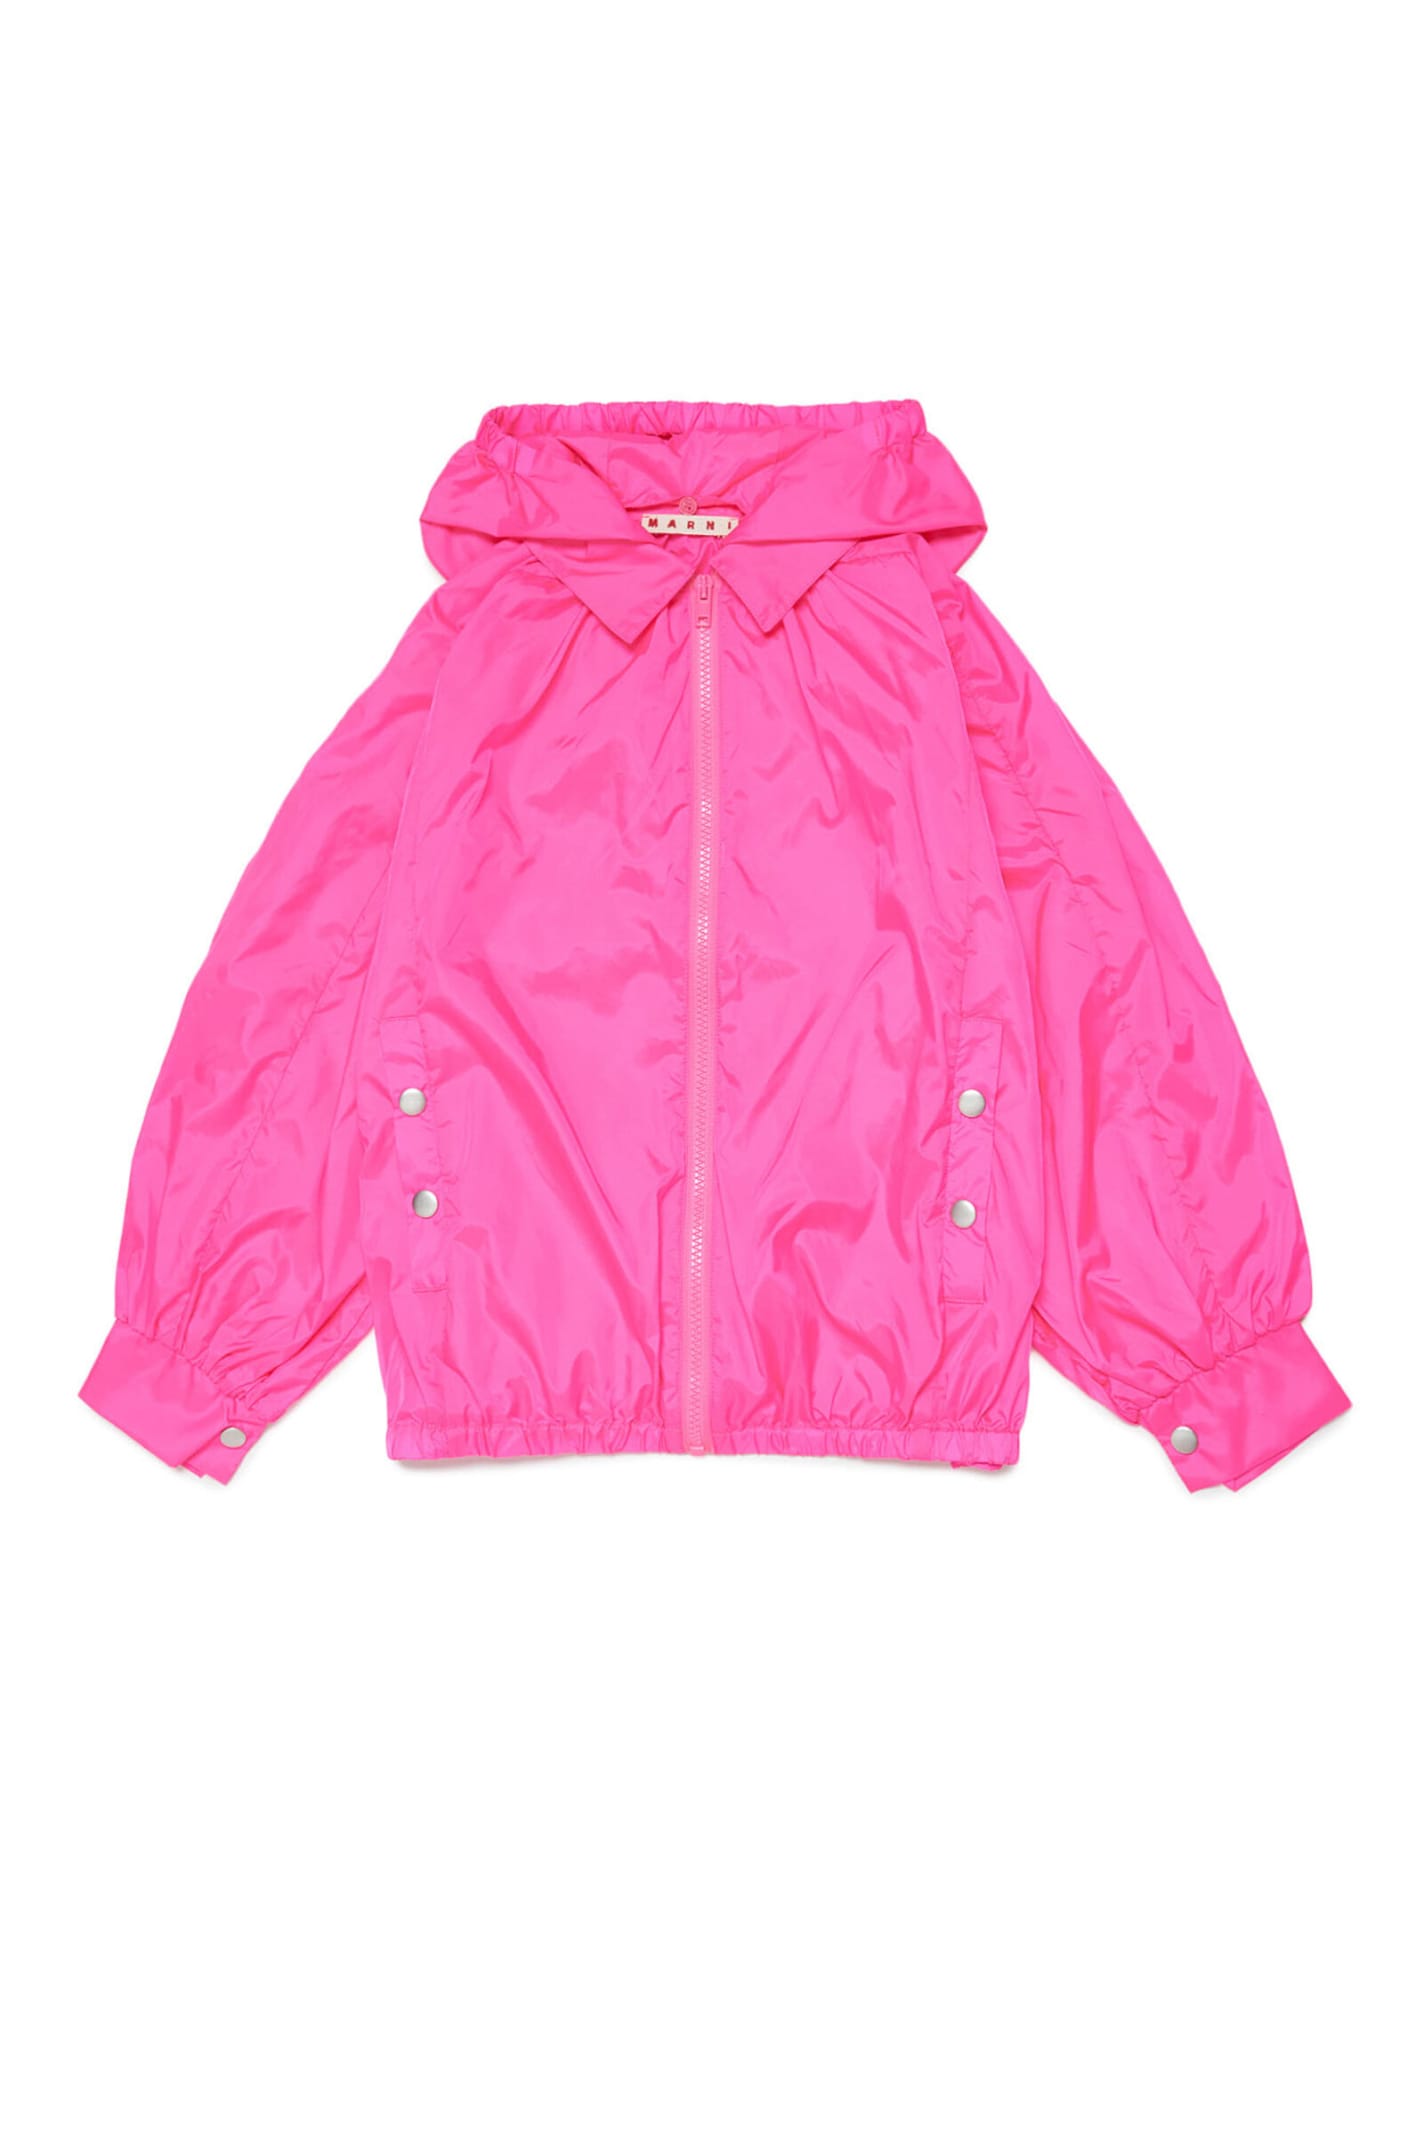 MARNI MJ110F JACKET MARNI FLUO PINK WATERPROOF UNLINED JACKET WITH ZIP AND LOGO ON THE HOOD